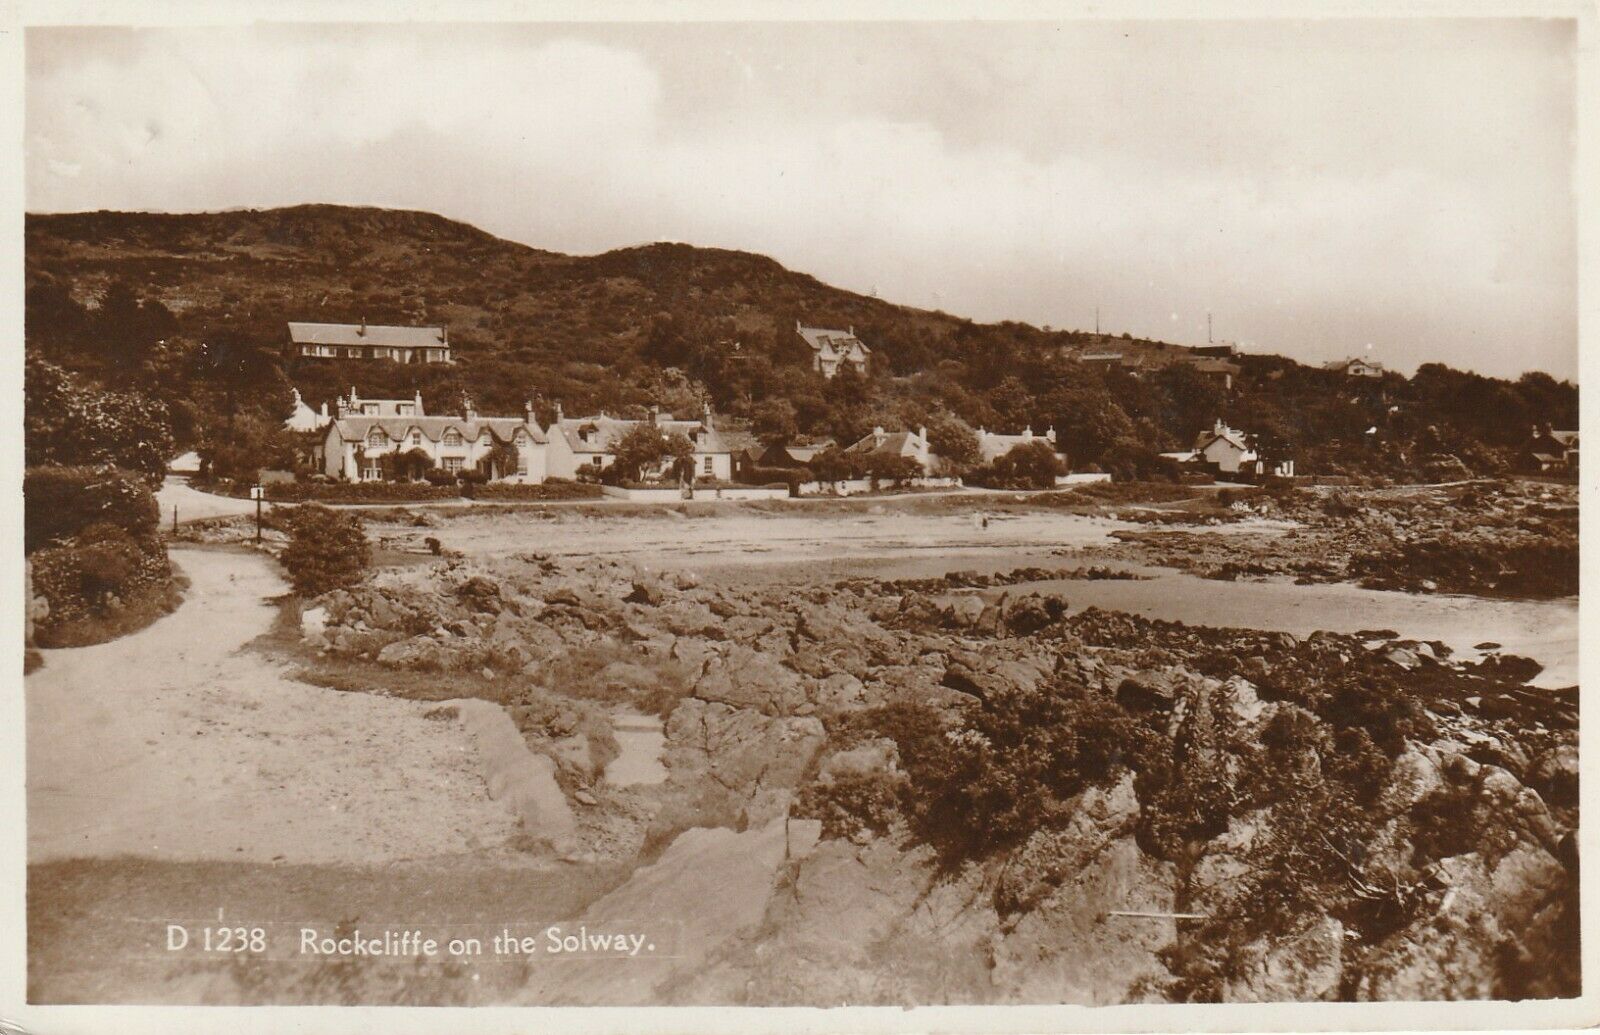 House Clearance - 1940 GB card Rockcliffe on the Solway